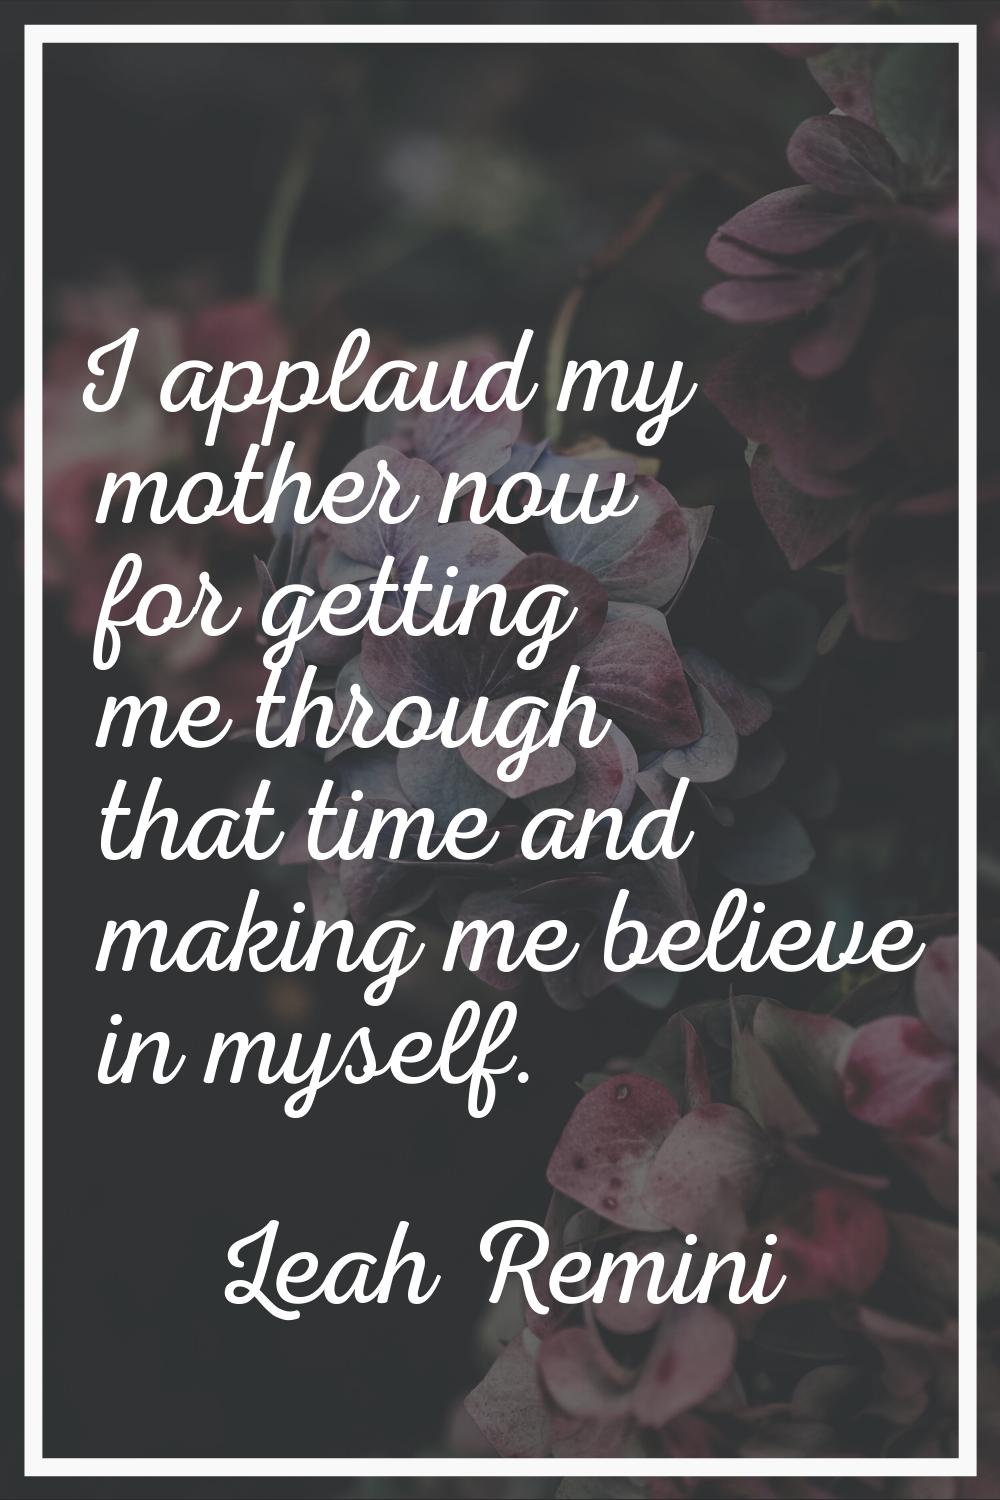 I applaud my mother now for getting me through that time and making me believe in myself.